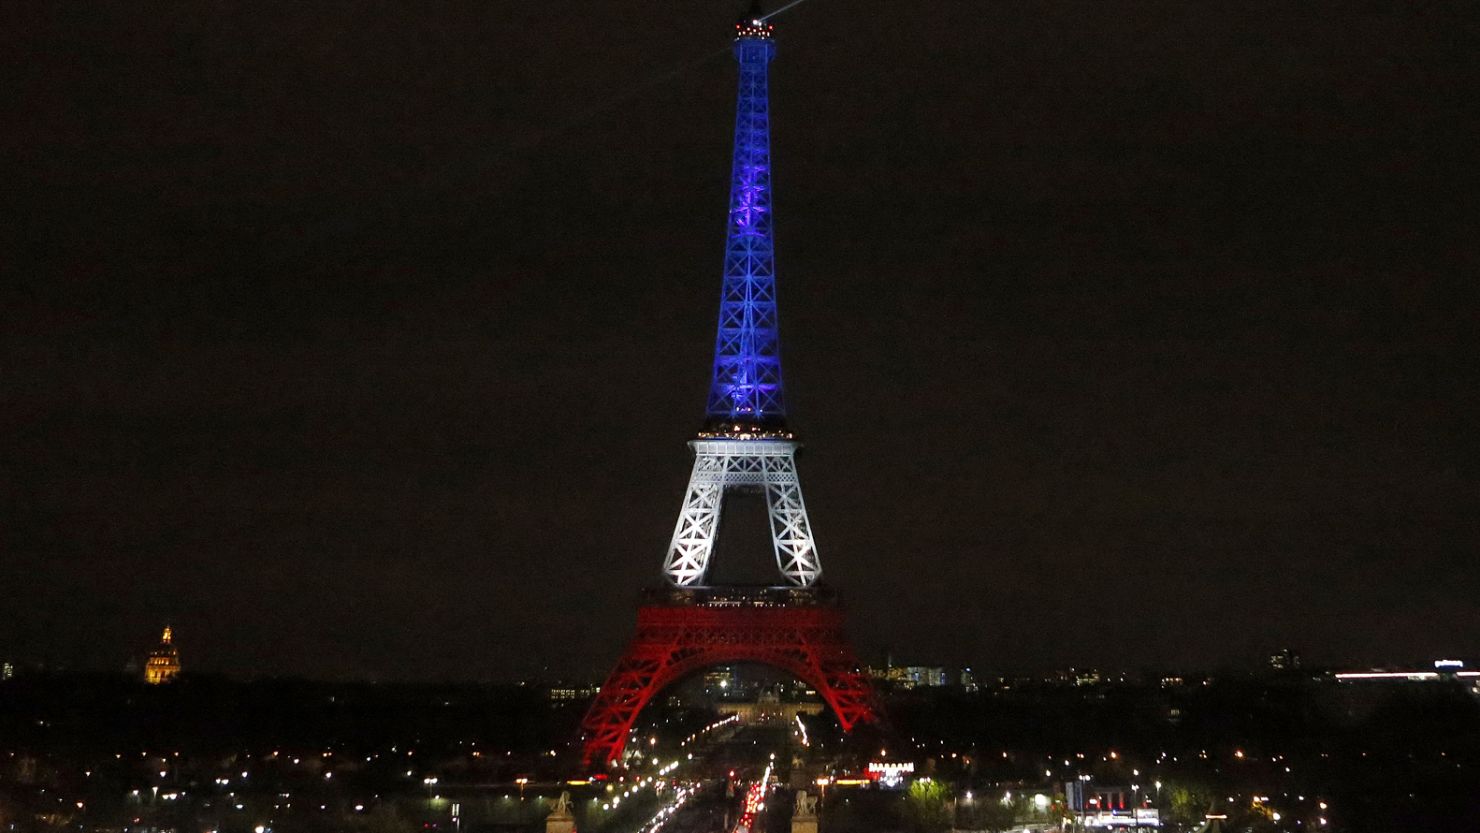 The Eiffel Tower is illuminated in the French national colors red, white and blue in honor of the victims of the terror attacks last Friday in Paris, Monday, Nov. 16, 2015.  France is urging its European partners to move swiftly to boost intelligence sharing, fight arms trafficking and terror financing, and strengthen border security in the wake of the Paris attacks. (AP Photo/Frank AugsteinAP)